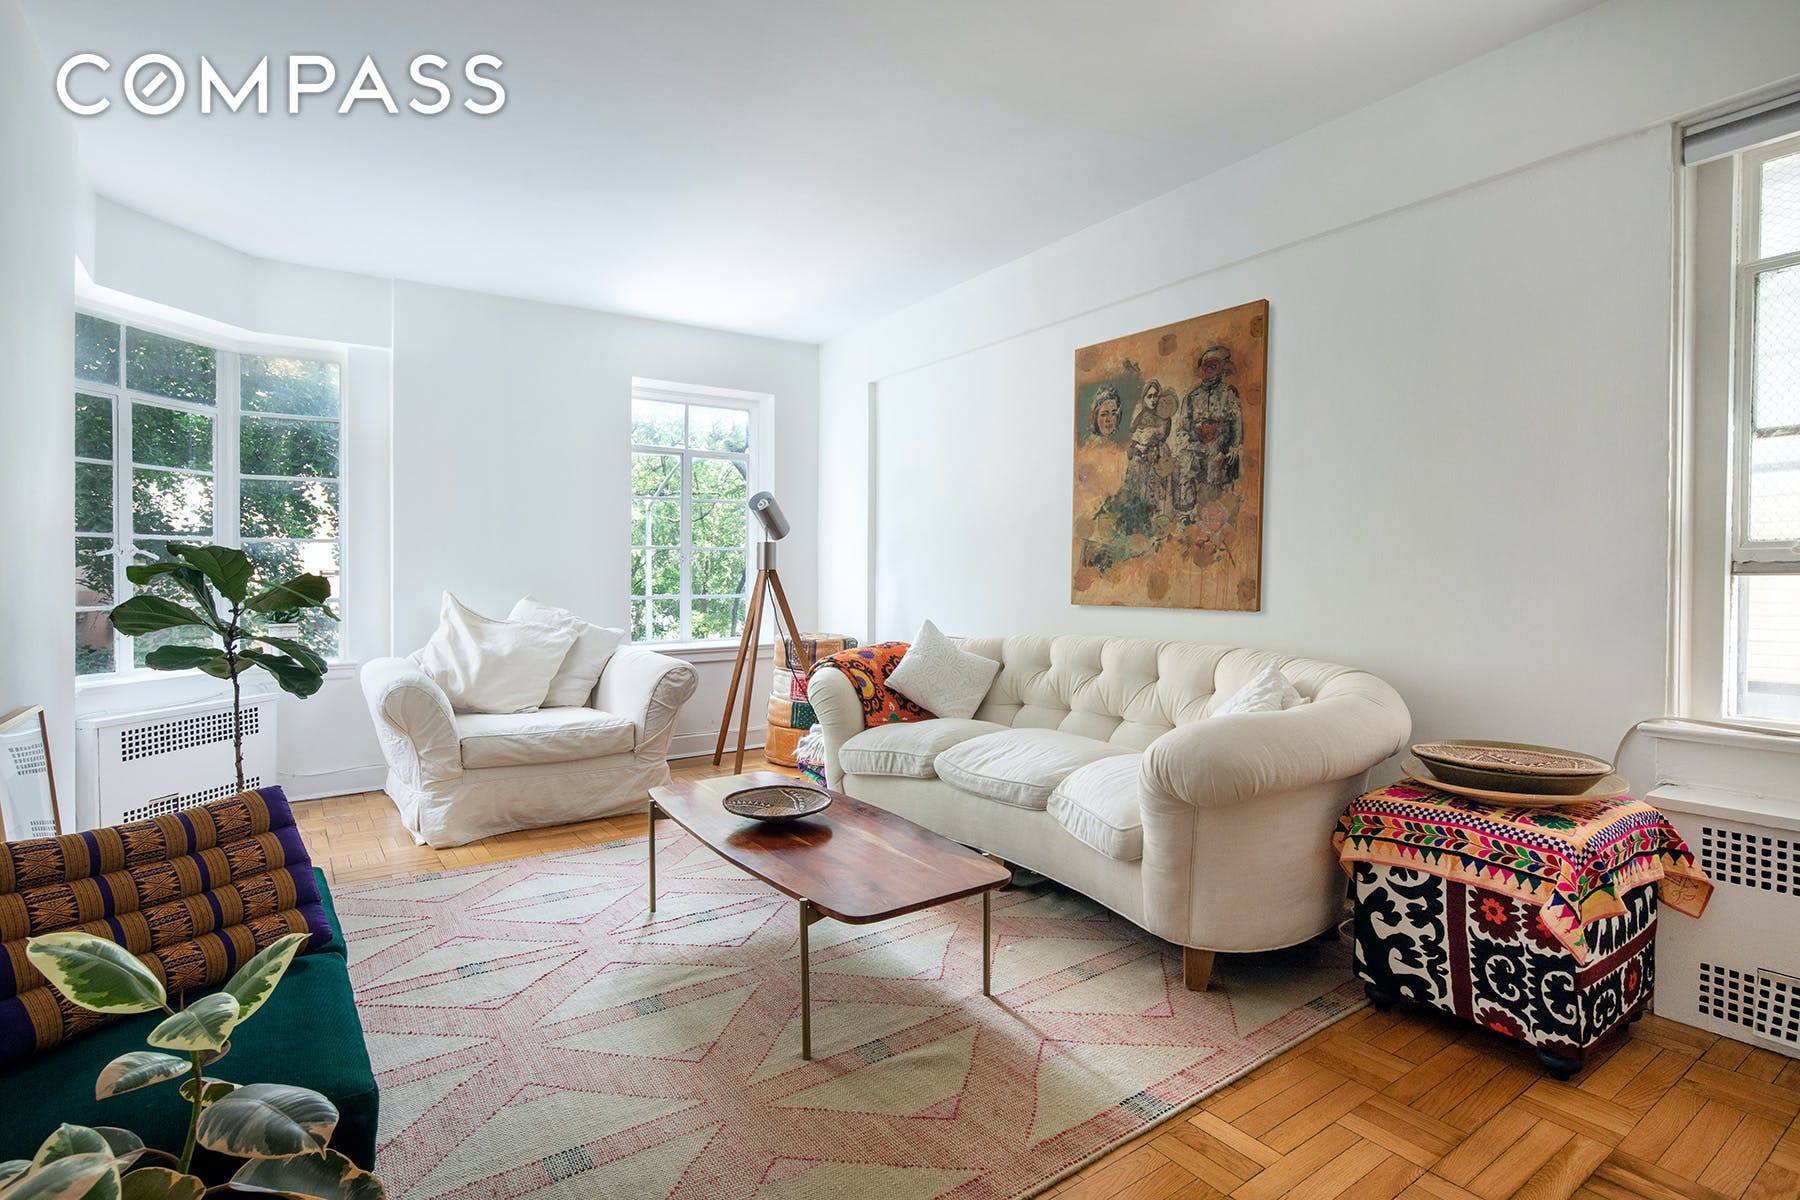 This incredibly charming West facing 1 Bedroom, 1 Bath home is located in the heart of the highly coveted and historic Brooklyn Heights, ideally situated at the entrance to the ...